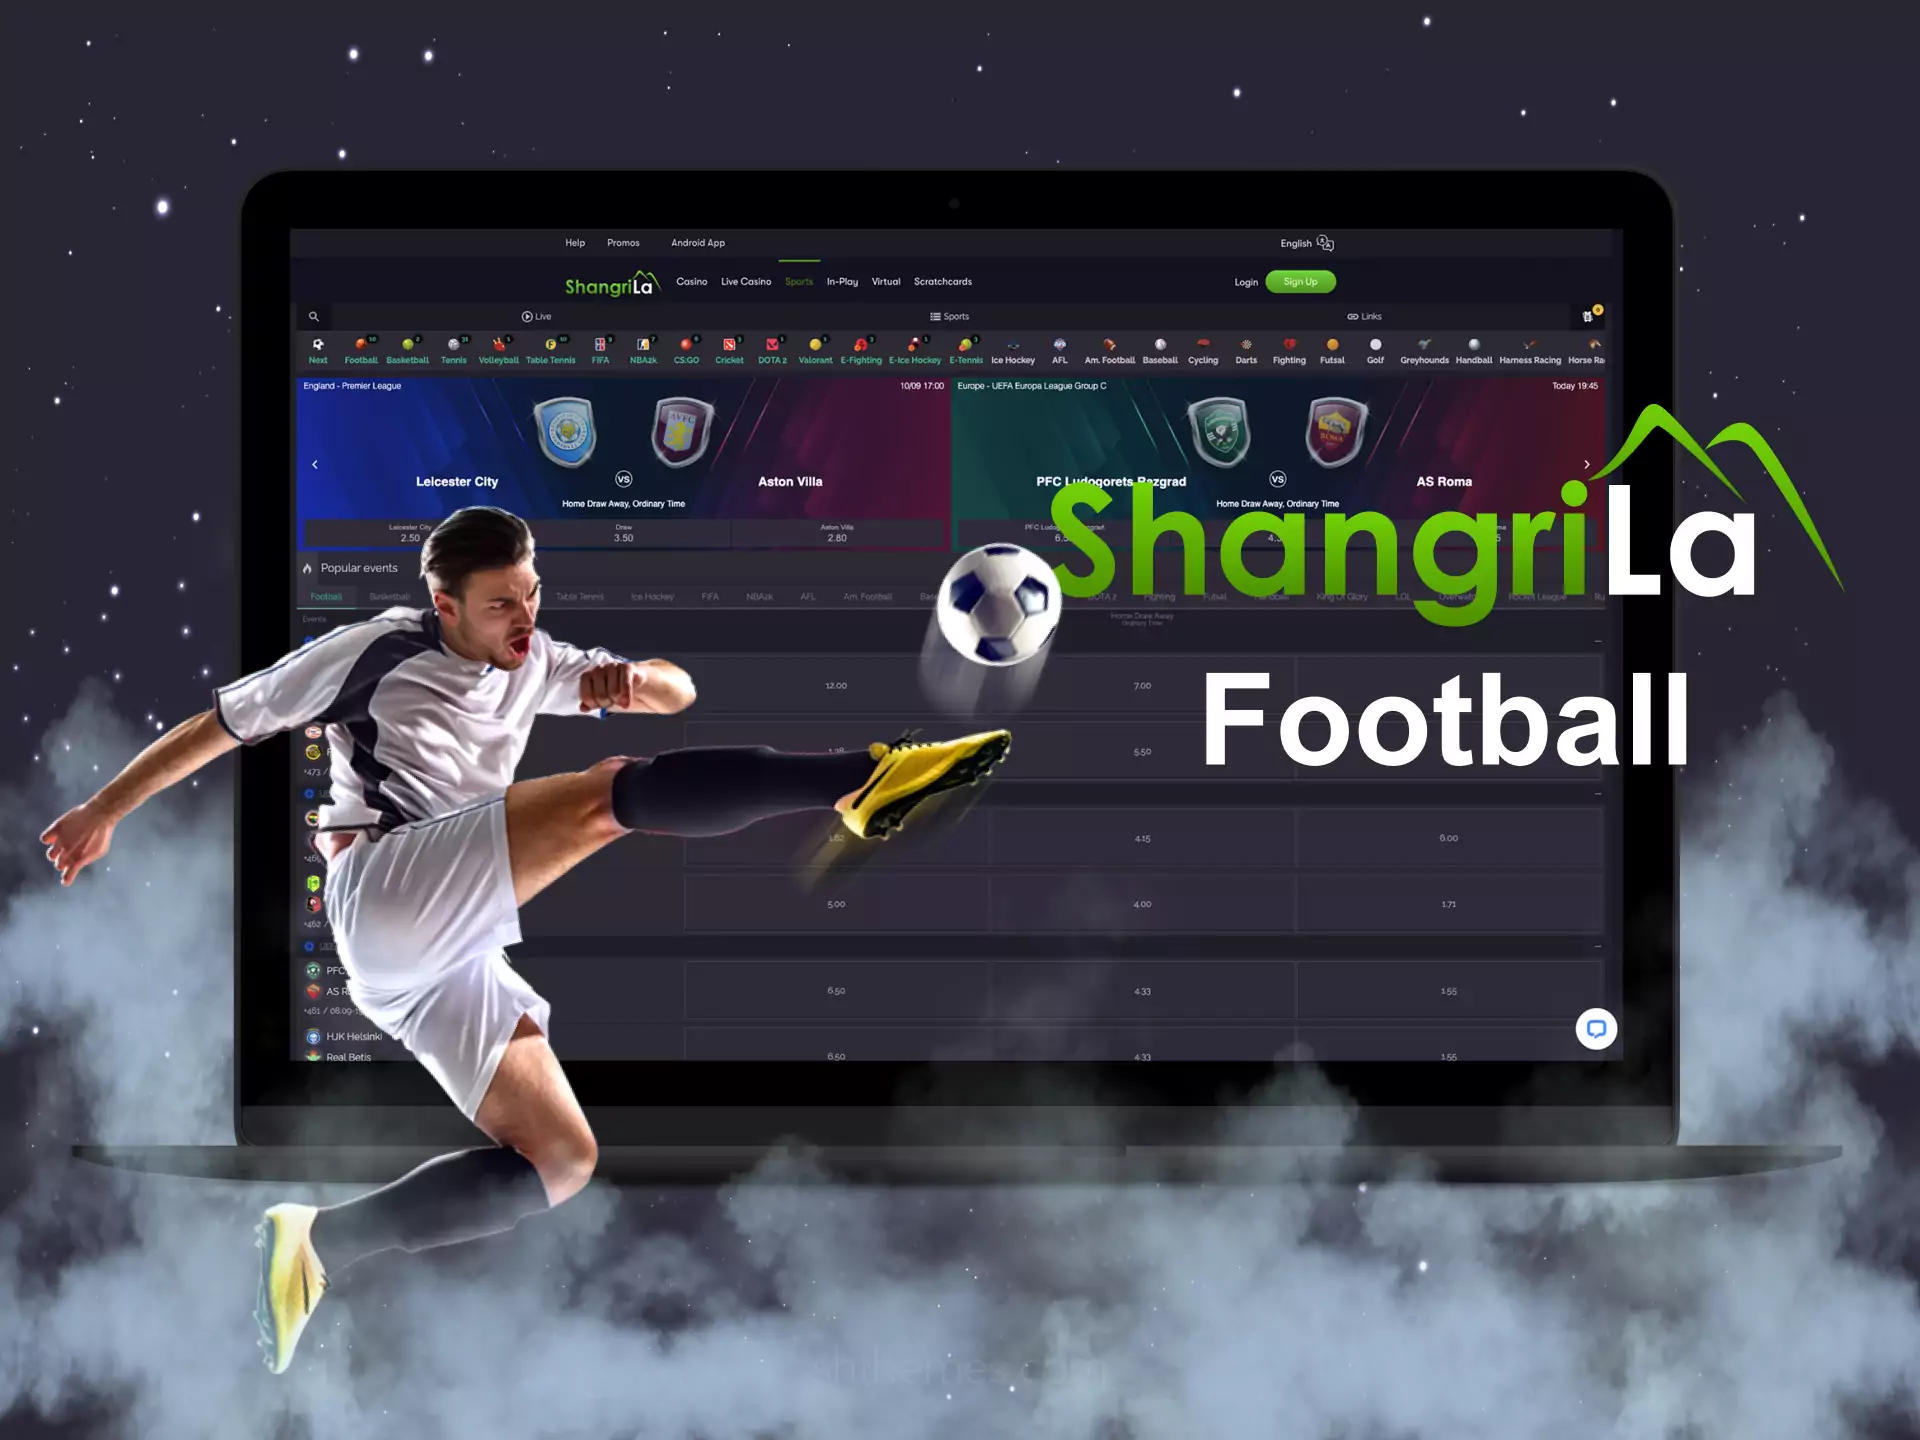 You can bet on football online at Shangri La.